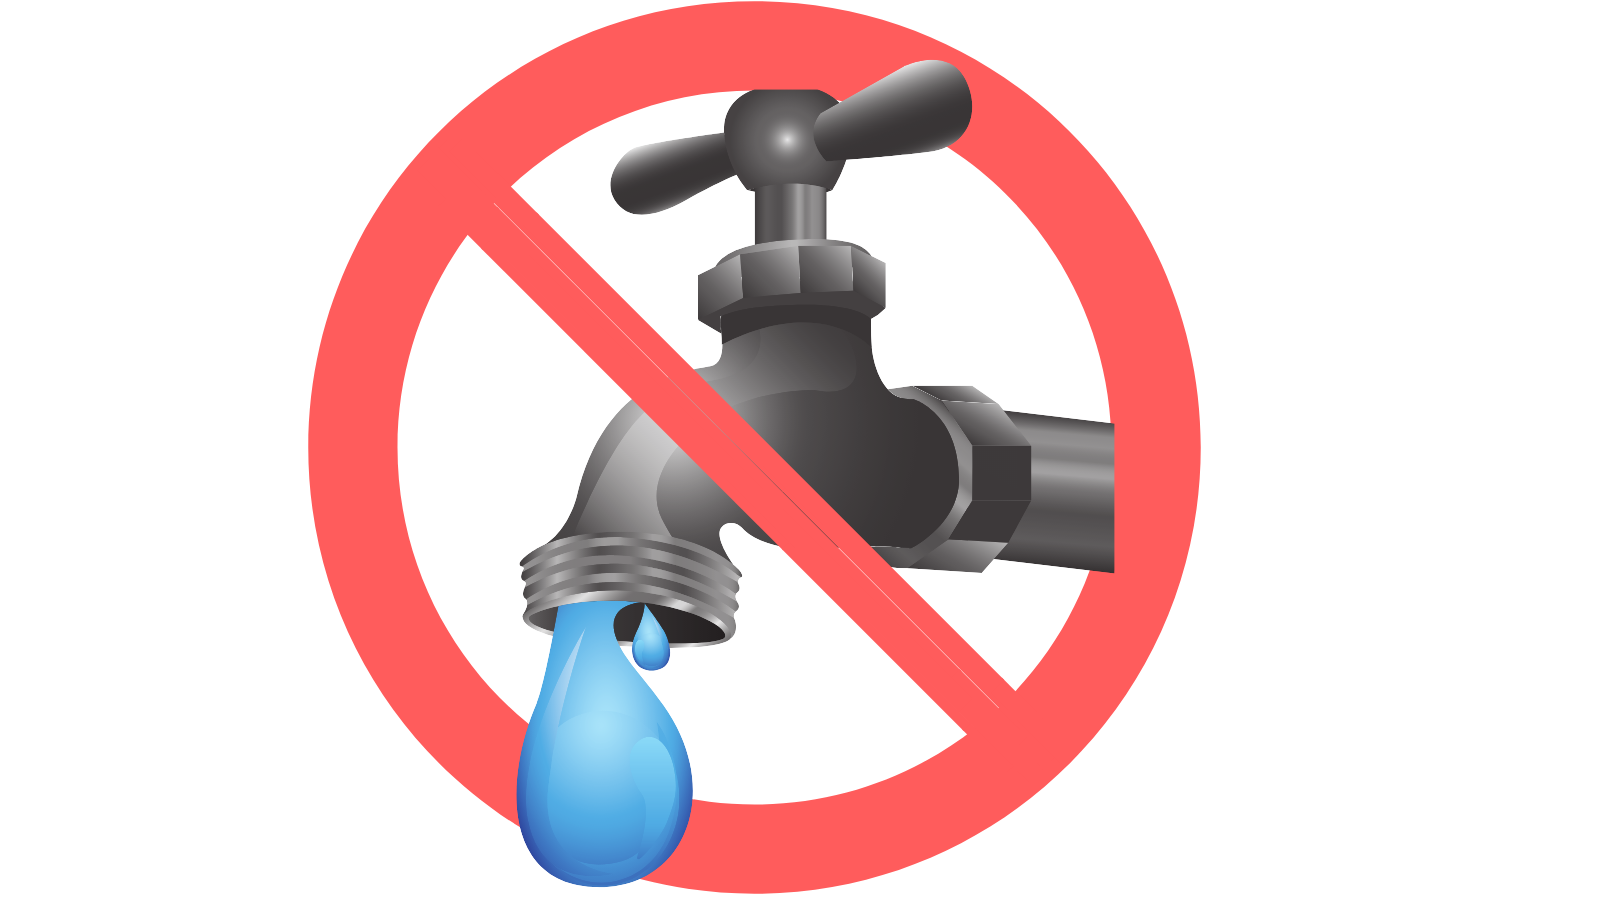 NO TAP WATER